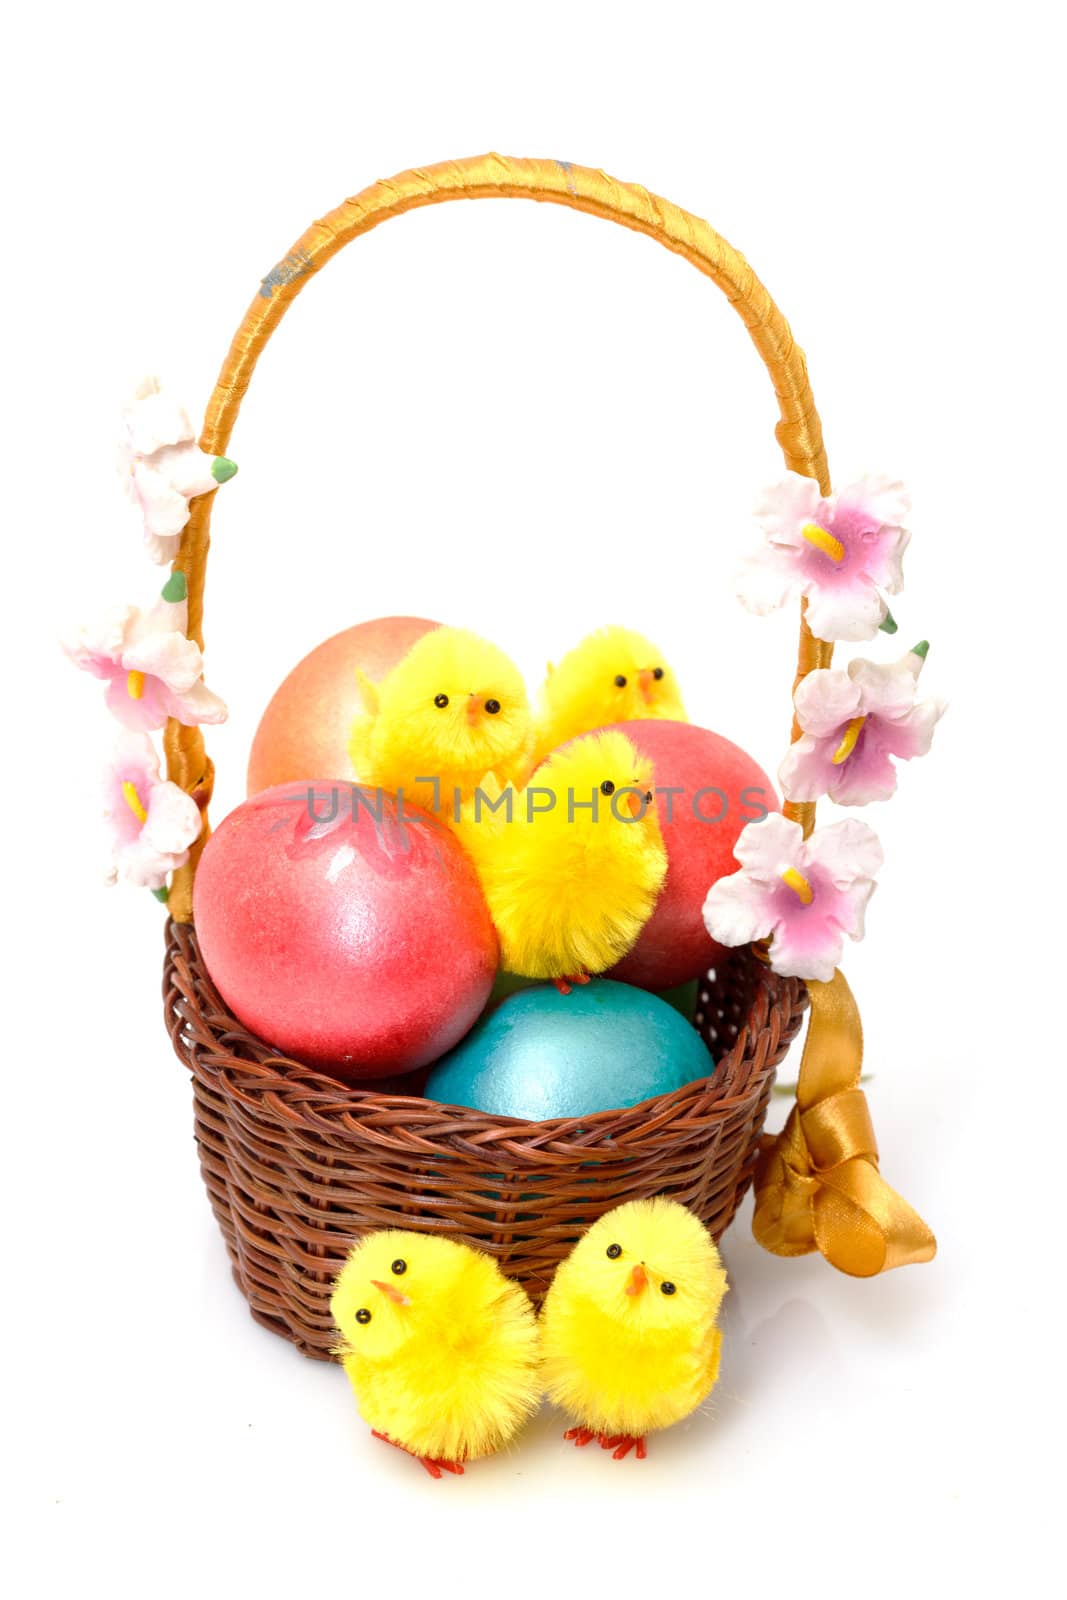 Basket with Easter Eggs on white background